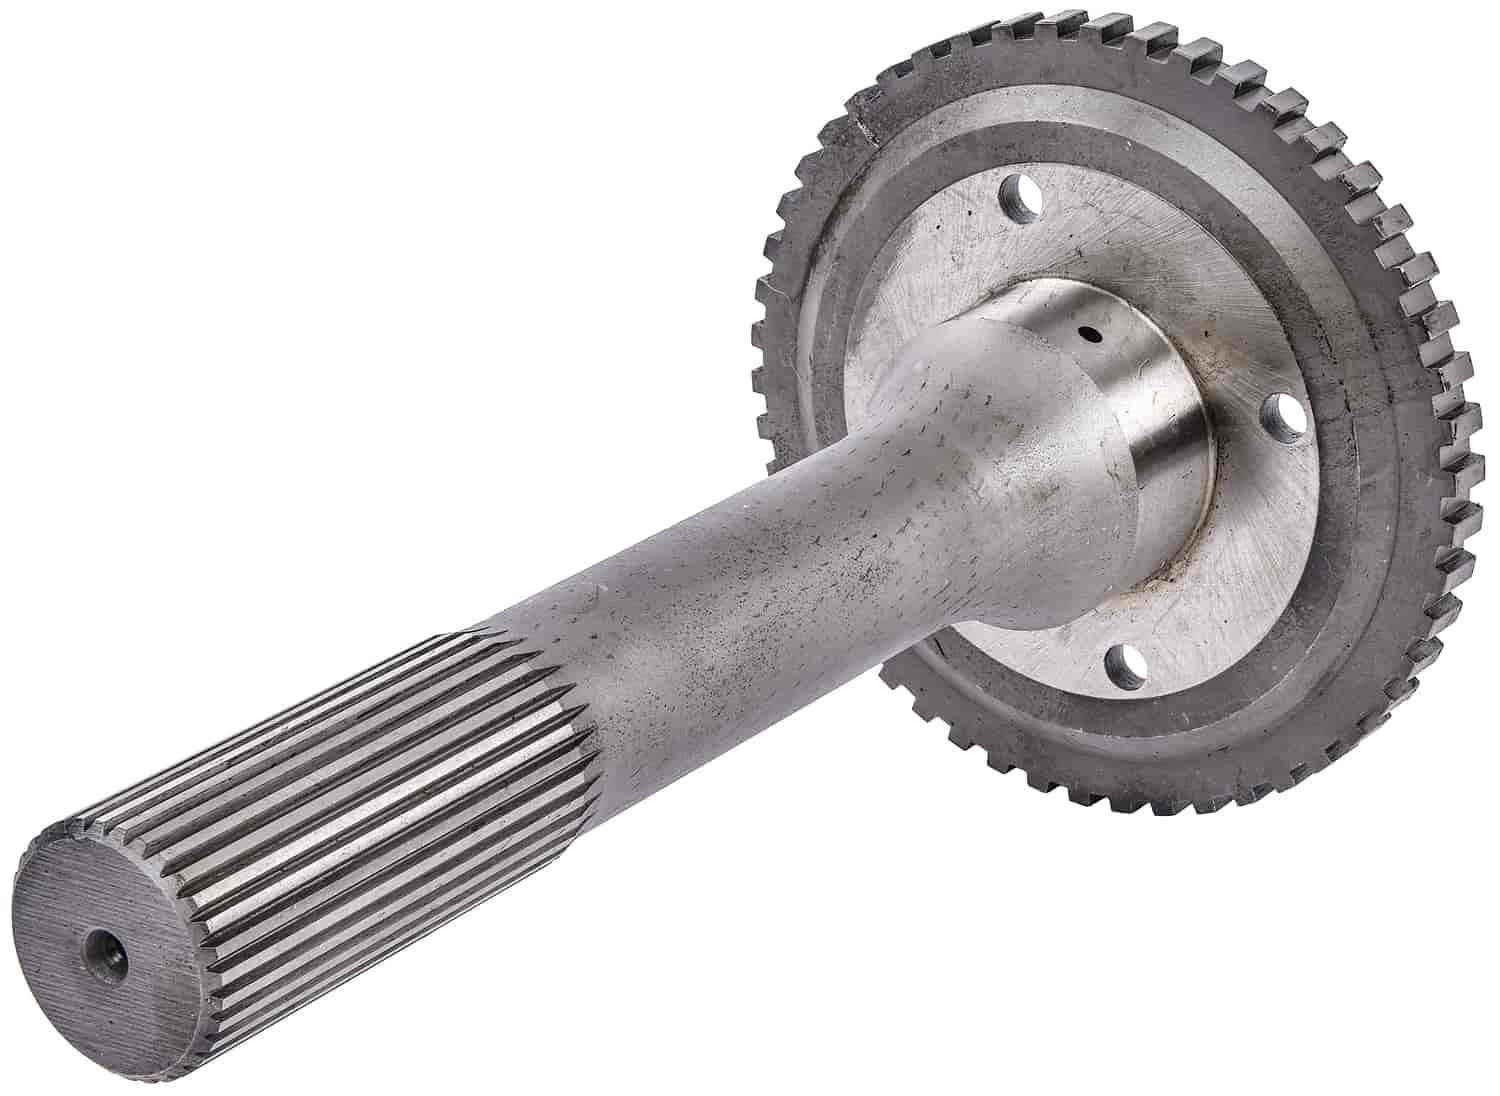 High Strength Transmission Output Shaft for GM TH400 [Rated to over 1200 HP]